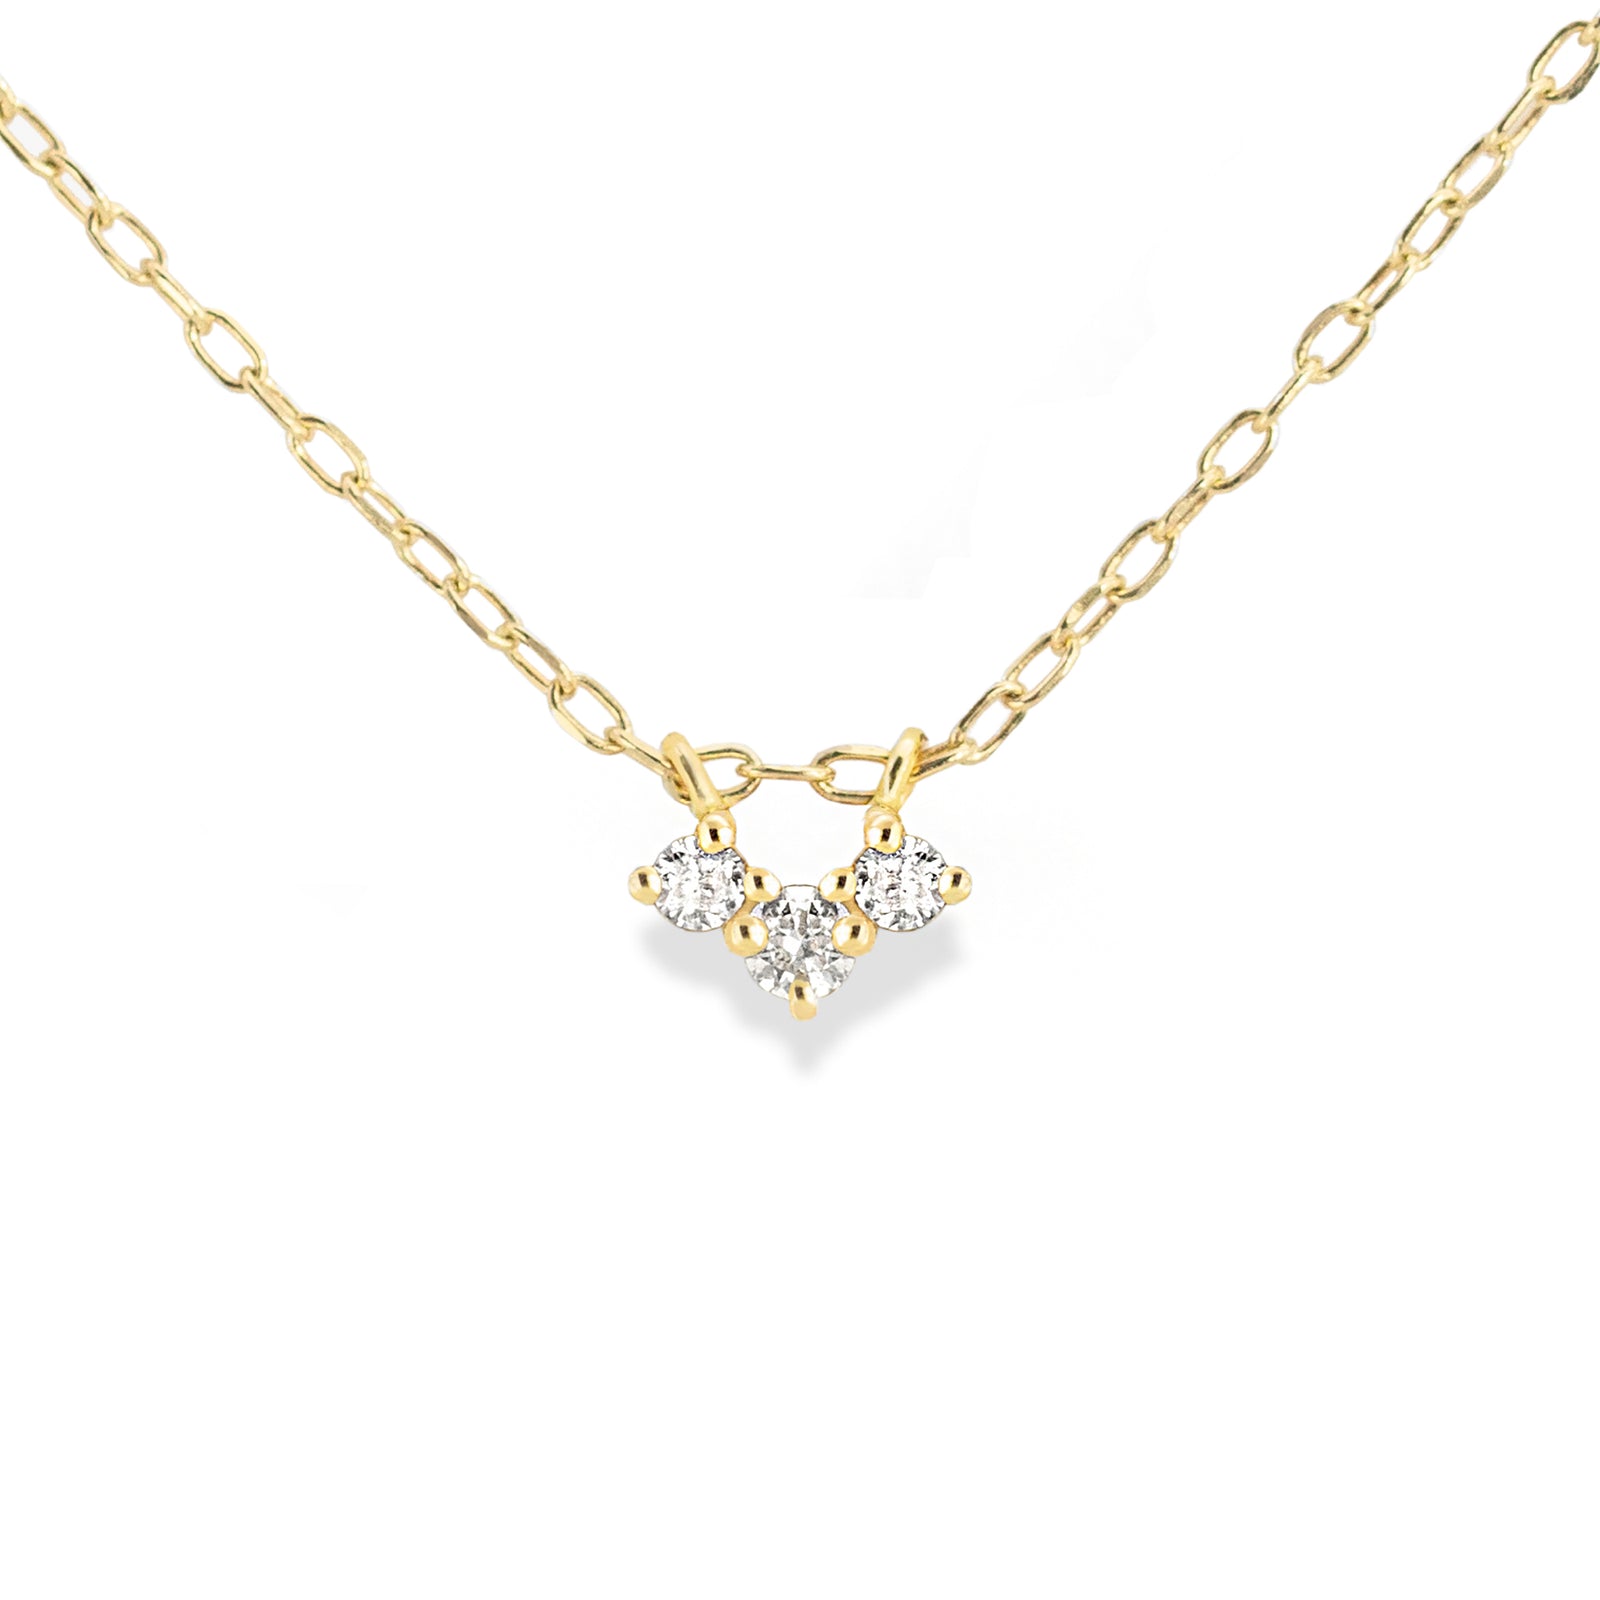 Jamie Park Jewelry - Three Diamond Necklace Upgrade everyday looks with this classic dainty diamond necklace. Perfect for day or night, this piece is perfect for wearing on special occasions or adding a touch of sparkles&nbsp;to your everyday look.